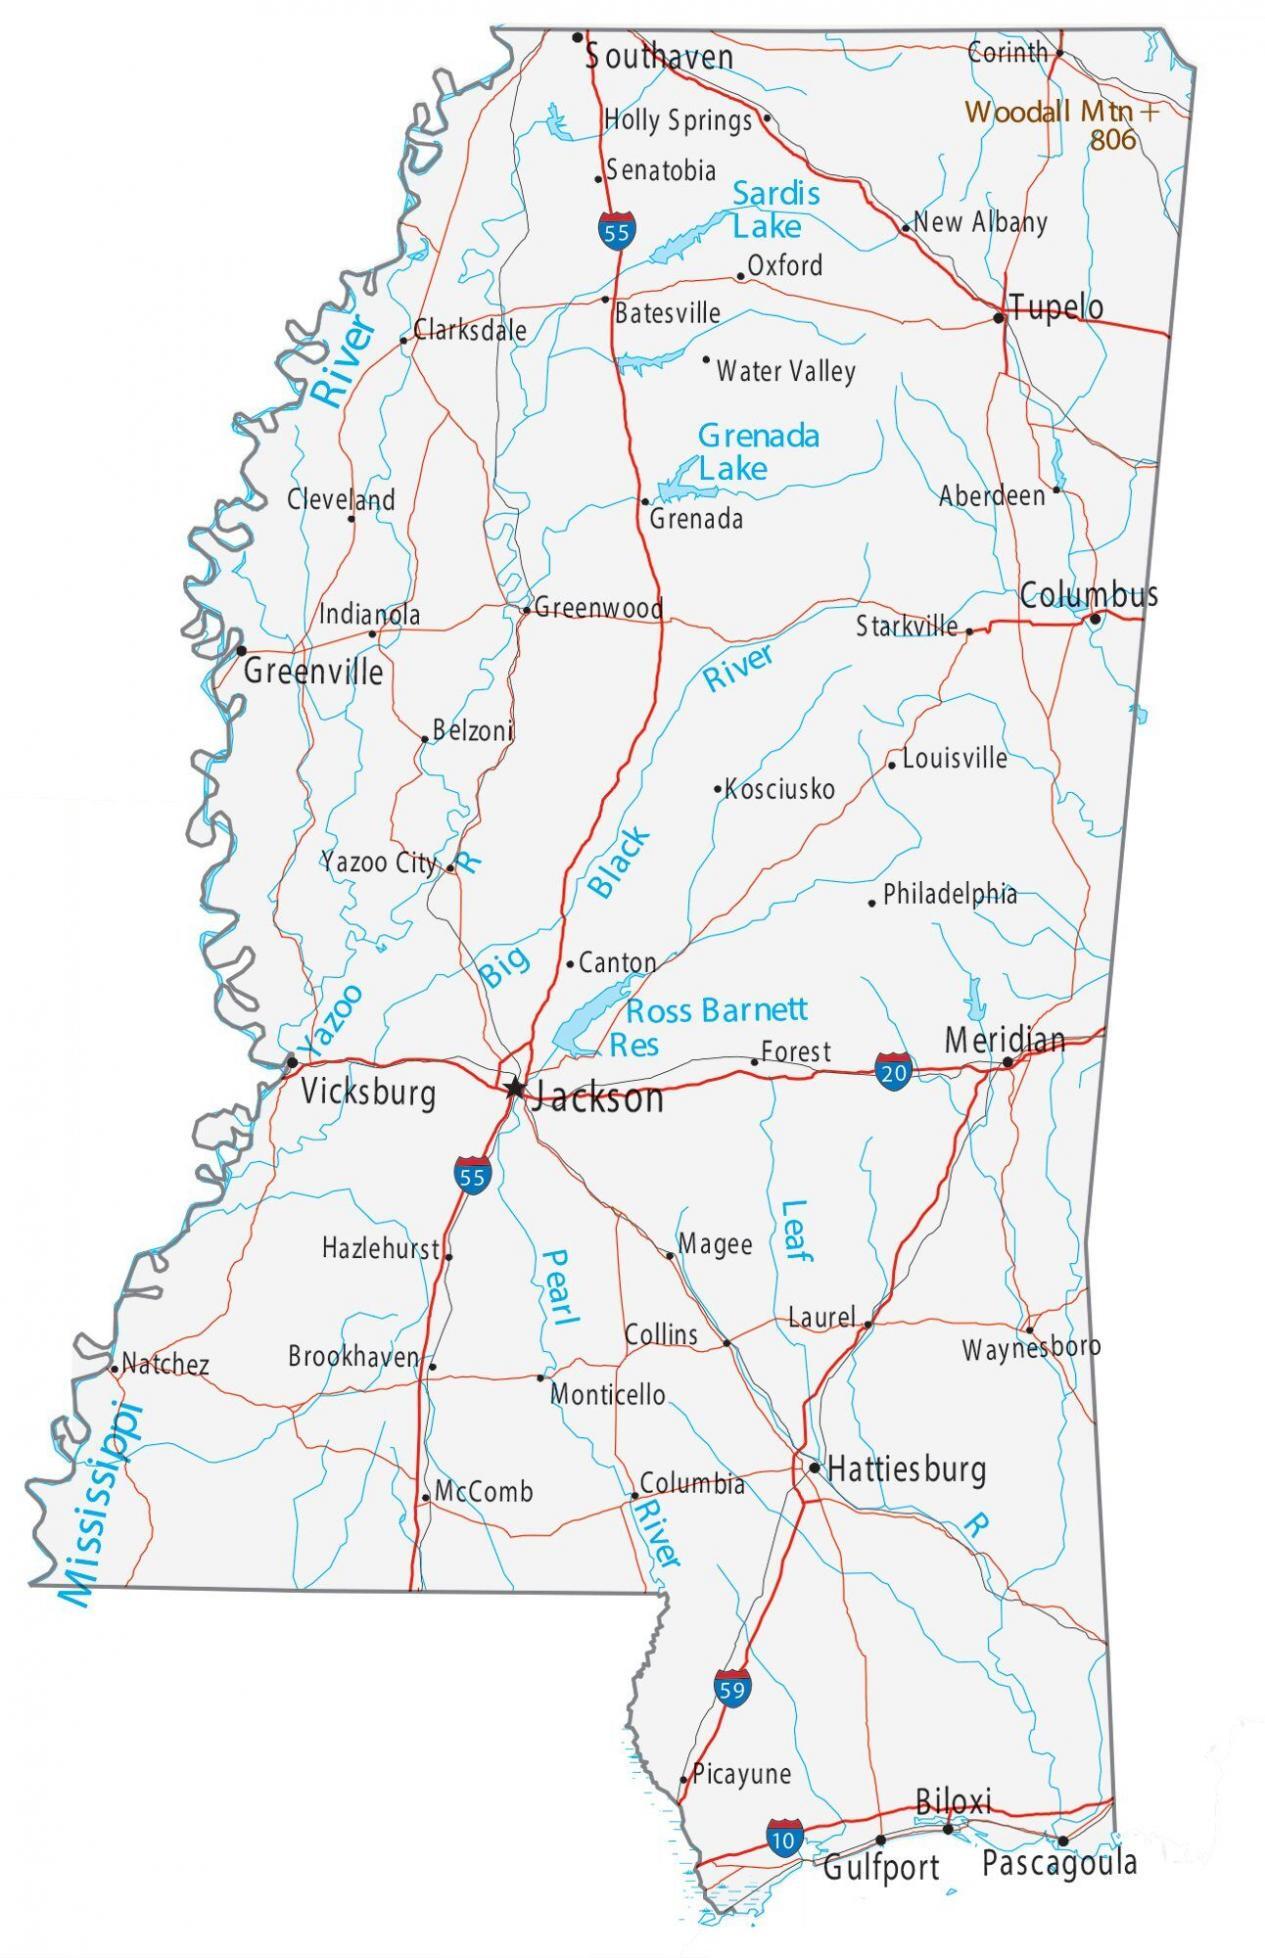 mississippi-county-map-gis-geography